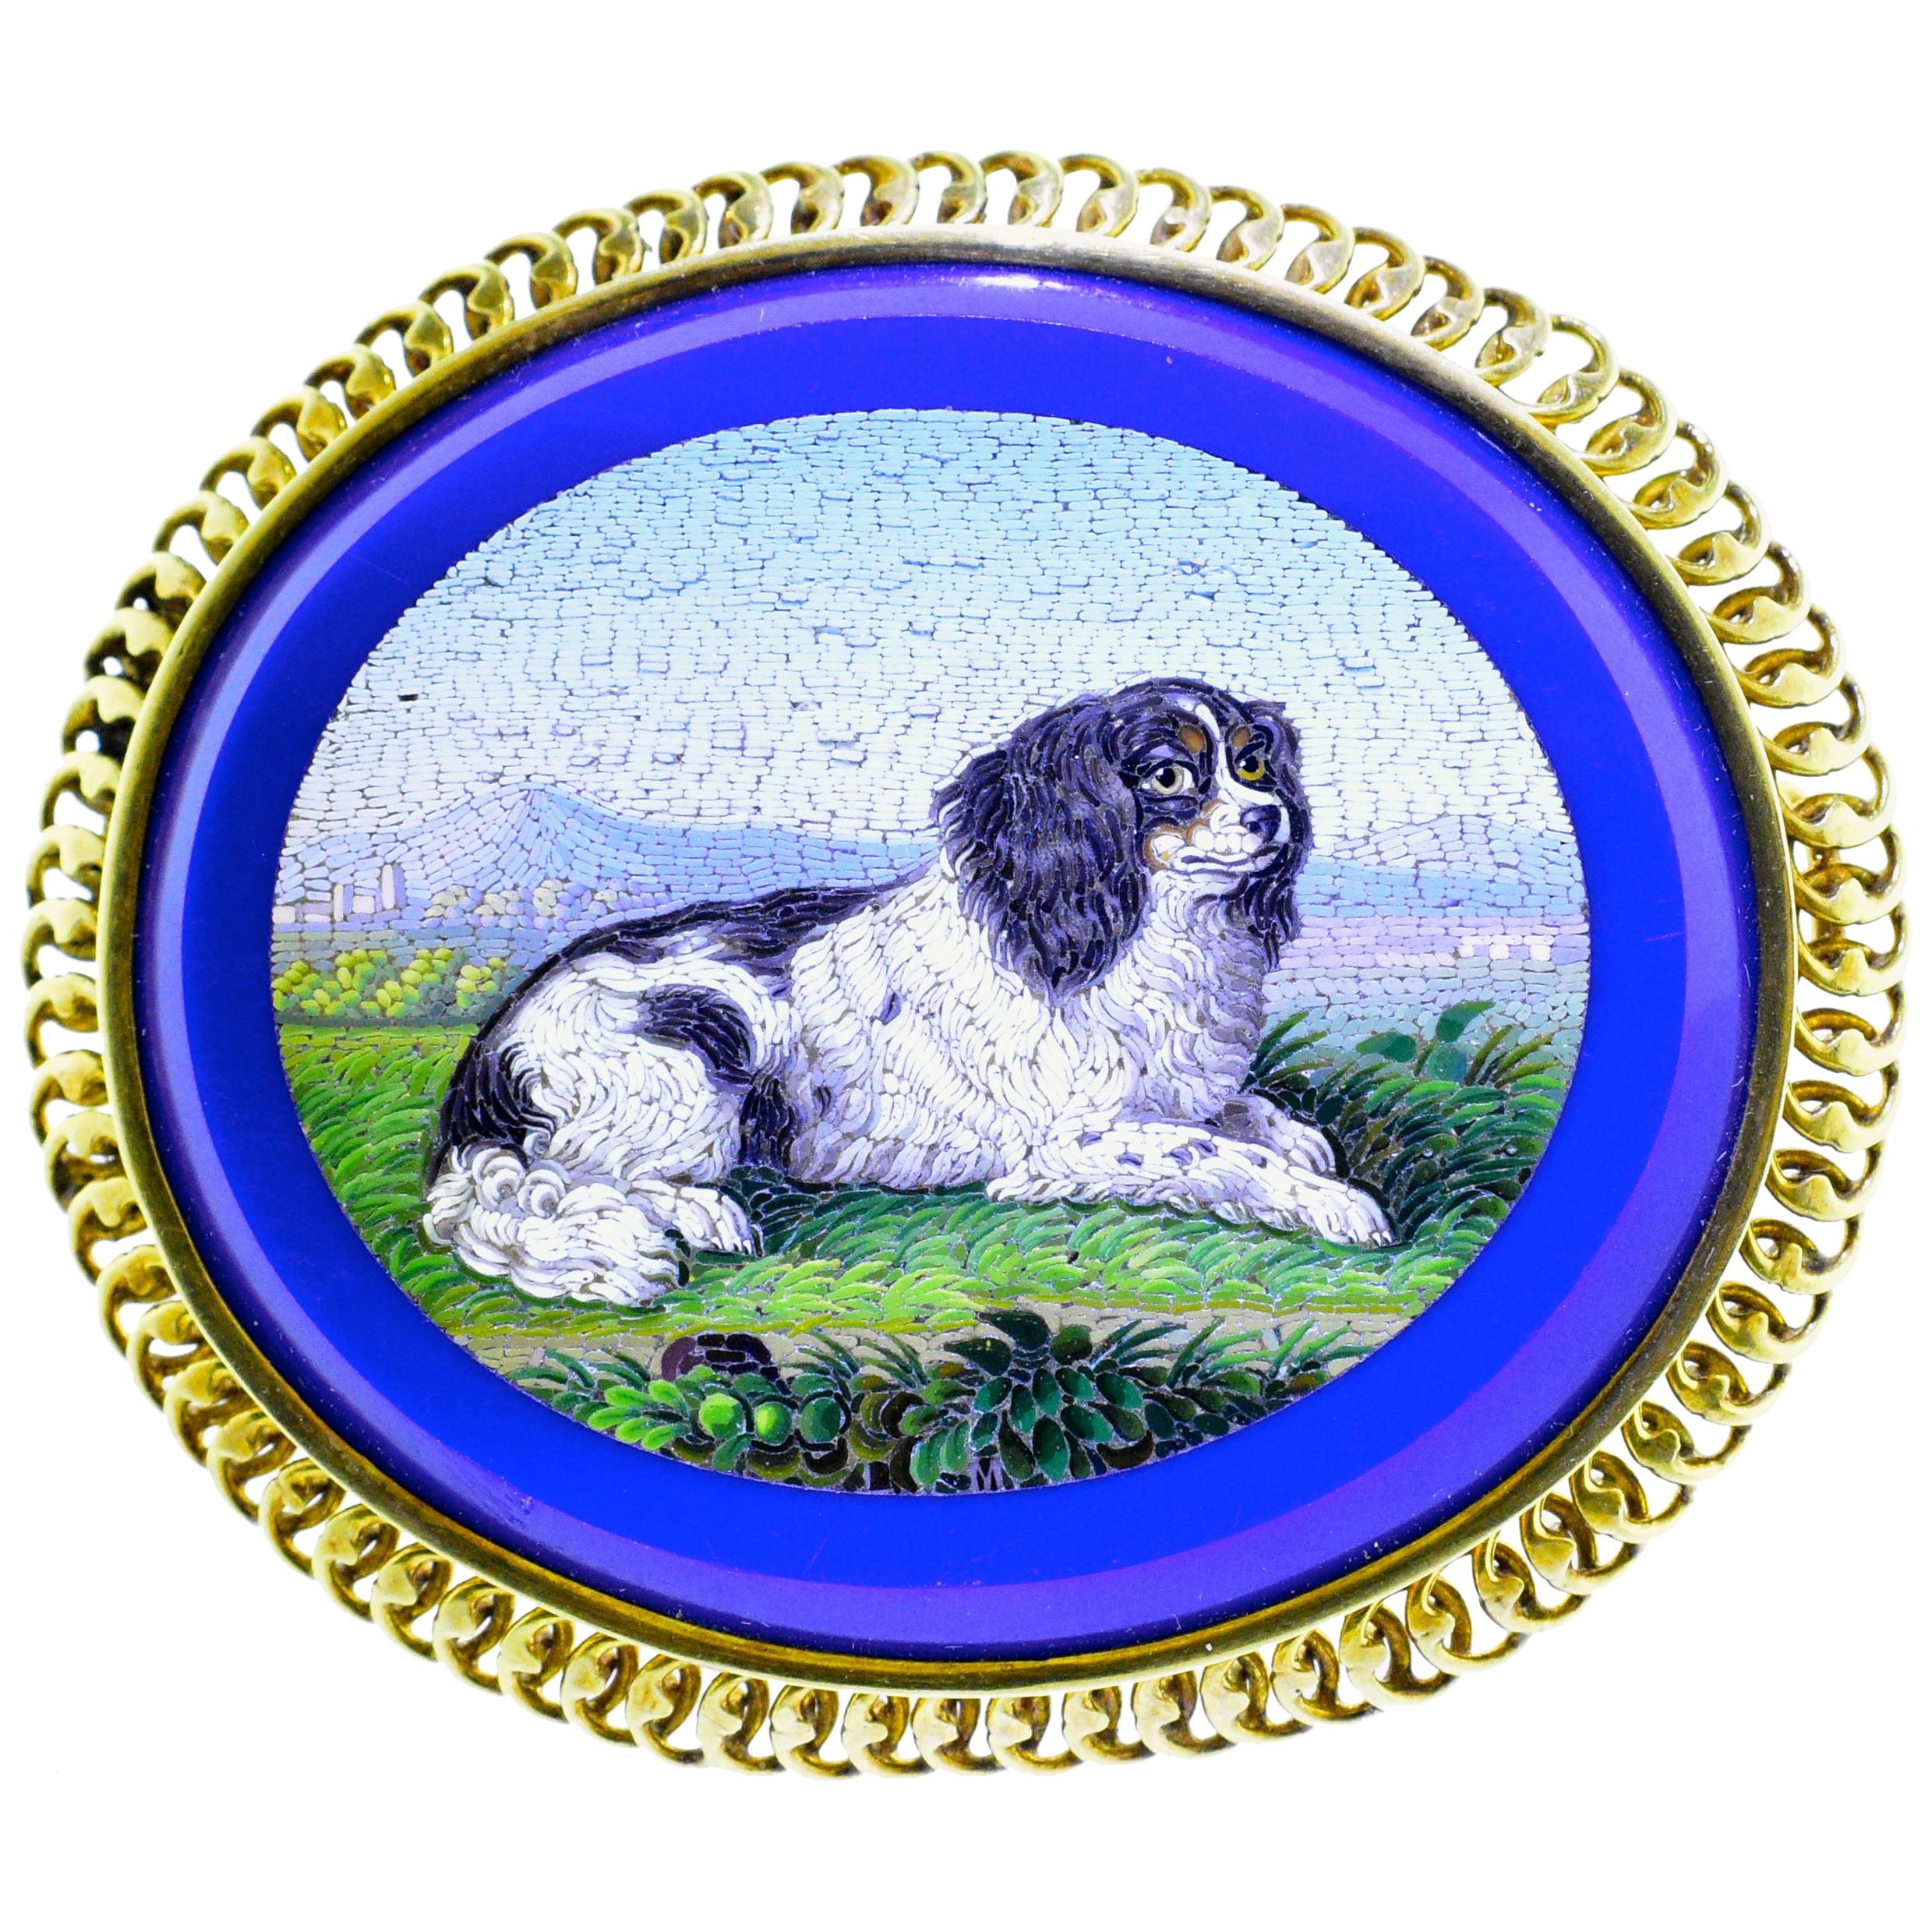 19th century antique brooch of micro-mosaic with very fine detail.  Notice the background of shaded mountains, the fine detail of the dog's fur and the foreground of vegetation.  Extremely well done, large and robust with a blue stone background